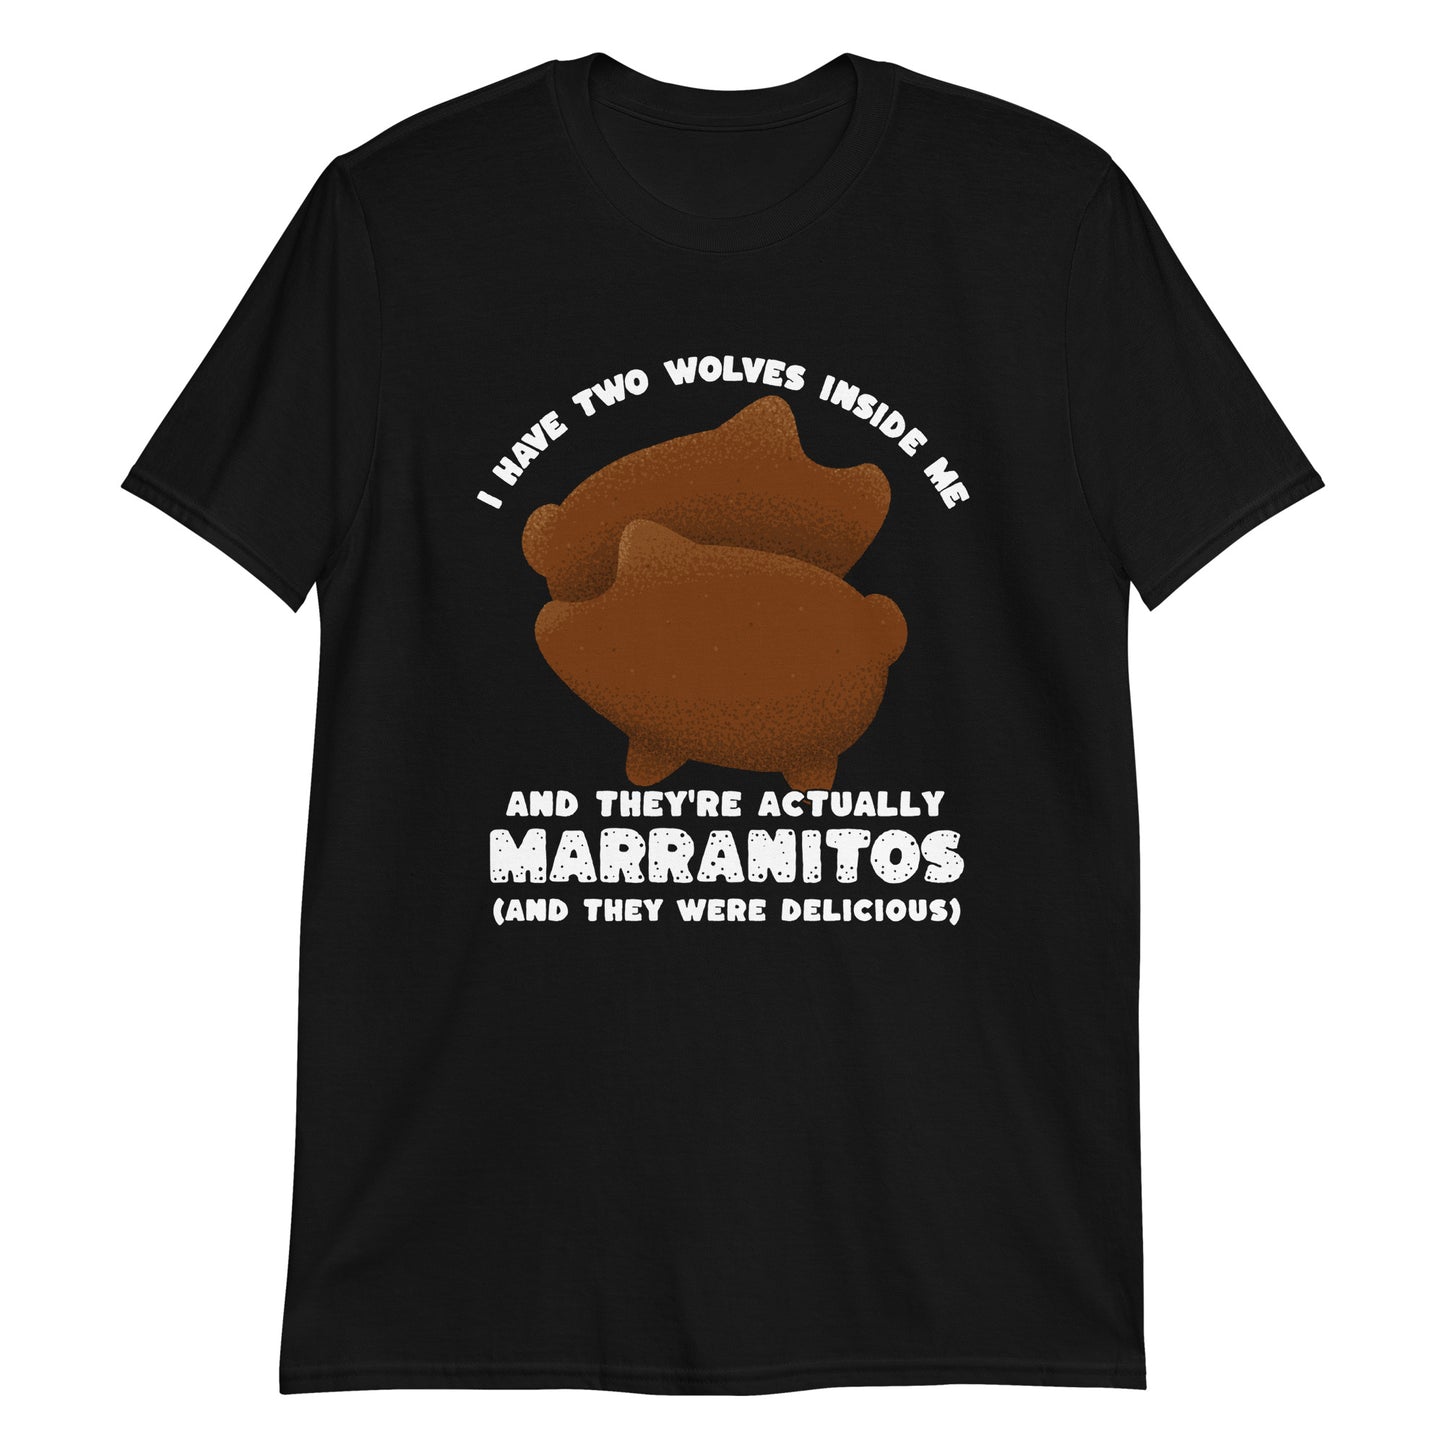 Two Marranitos T-Shirt for Mexican Food Pan Dulce Lovers